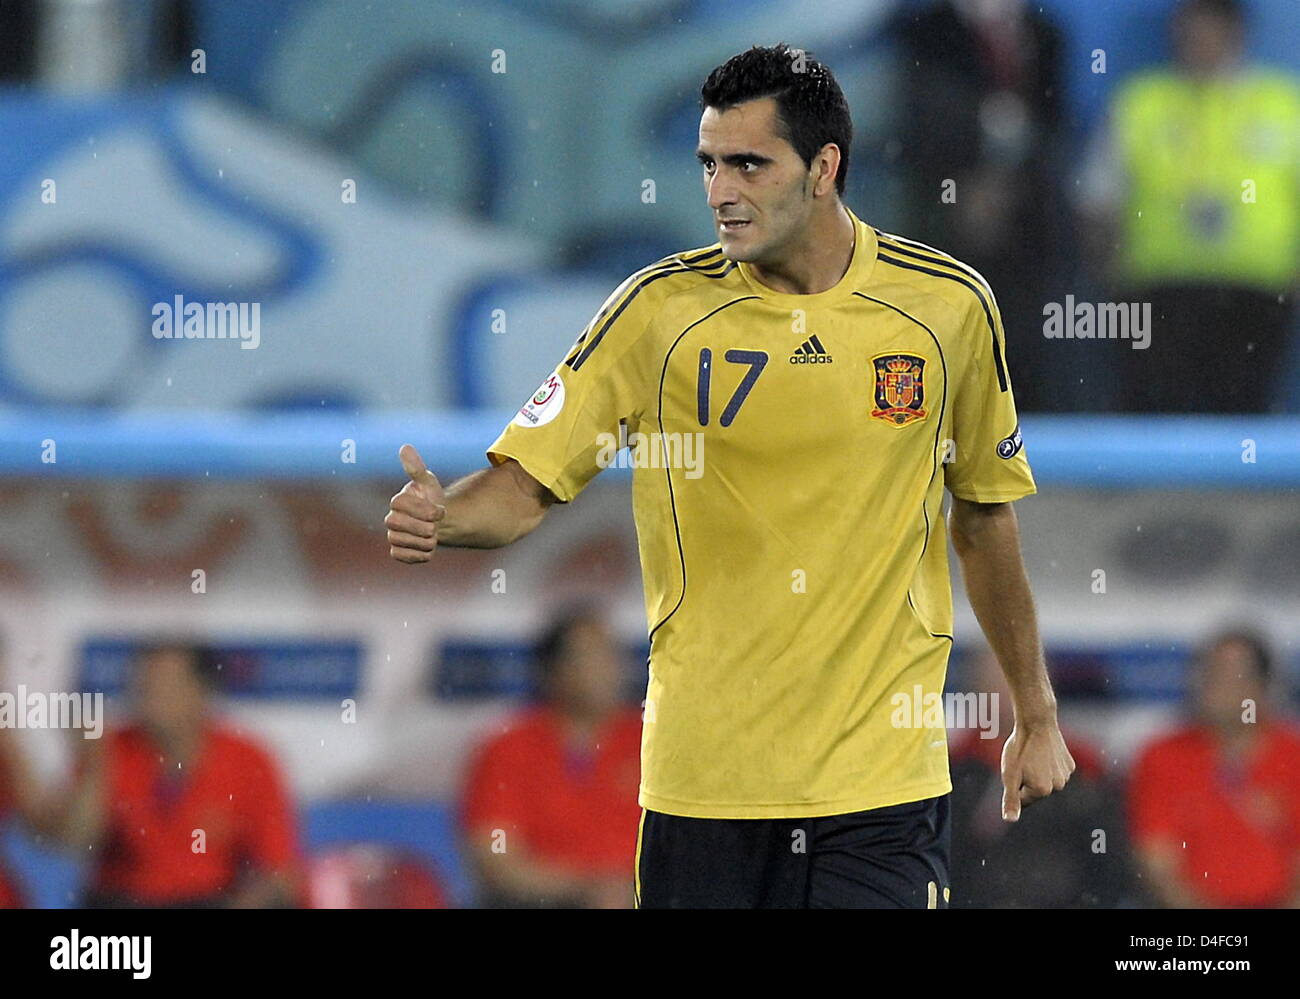 Daniel Guiza of Spain shows thumbs up after his 0-2 goal during the UEFA EURO 2008 semifinal match between Russia and Spain at the Ernst Happel stadium in Vienna, Austria, 26 June 2008. Photo: Achim Scheidemann dpa +please note UEFA restrictions particulary in regard to slide shows and 'No Mobile Services'+ +++(c) dpa - Bildfunk+++ Stock Photo